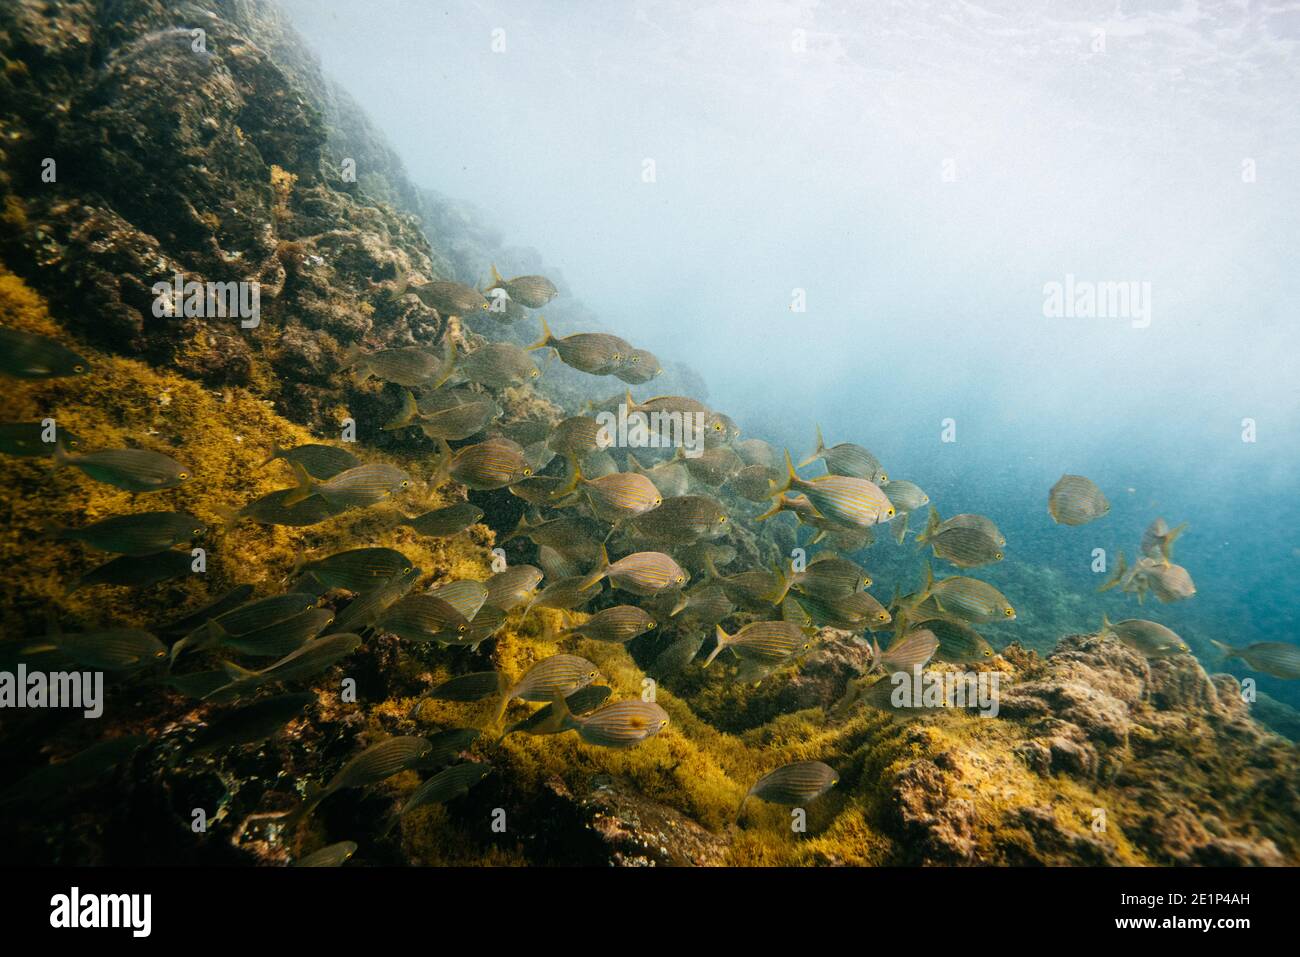 Fish swimming peacefully on the shore near the rocks Stock Photo